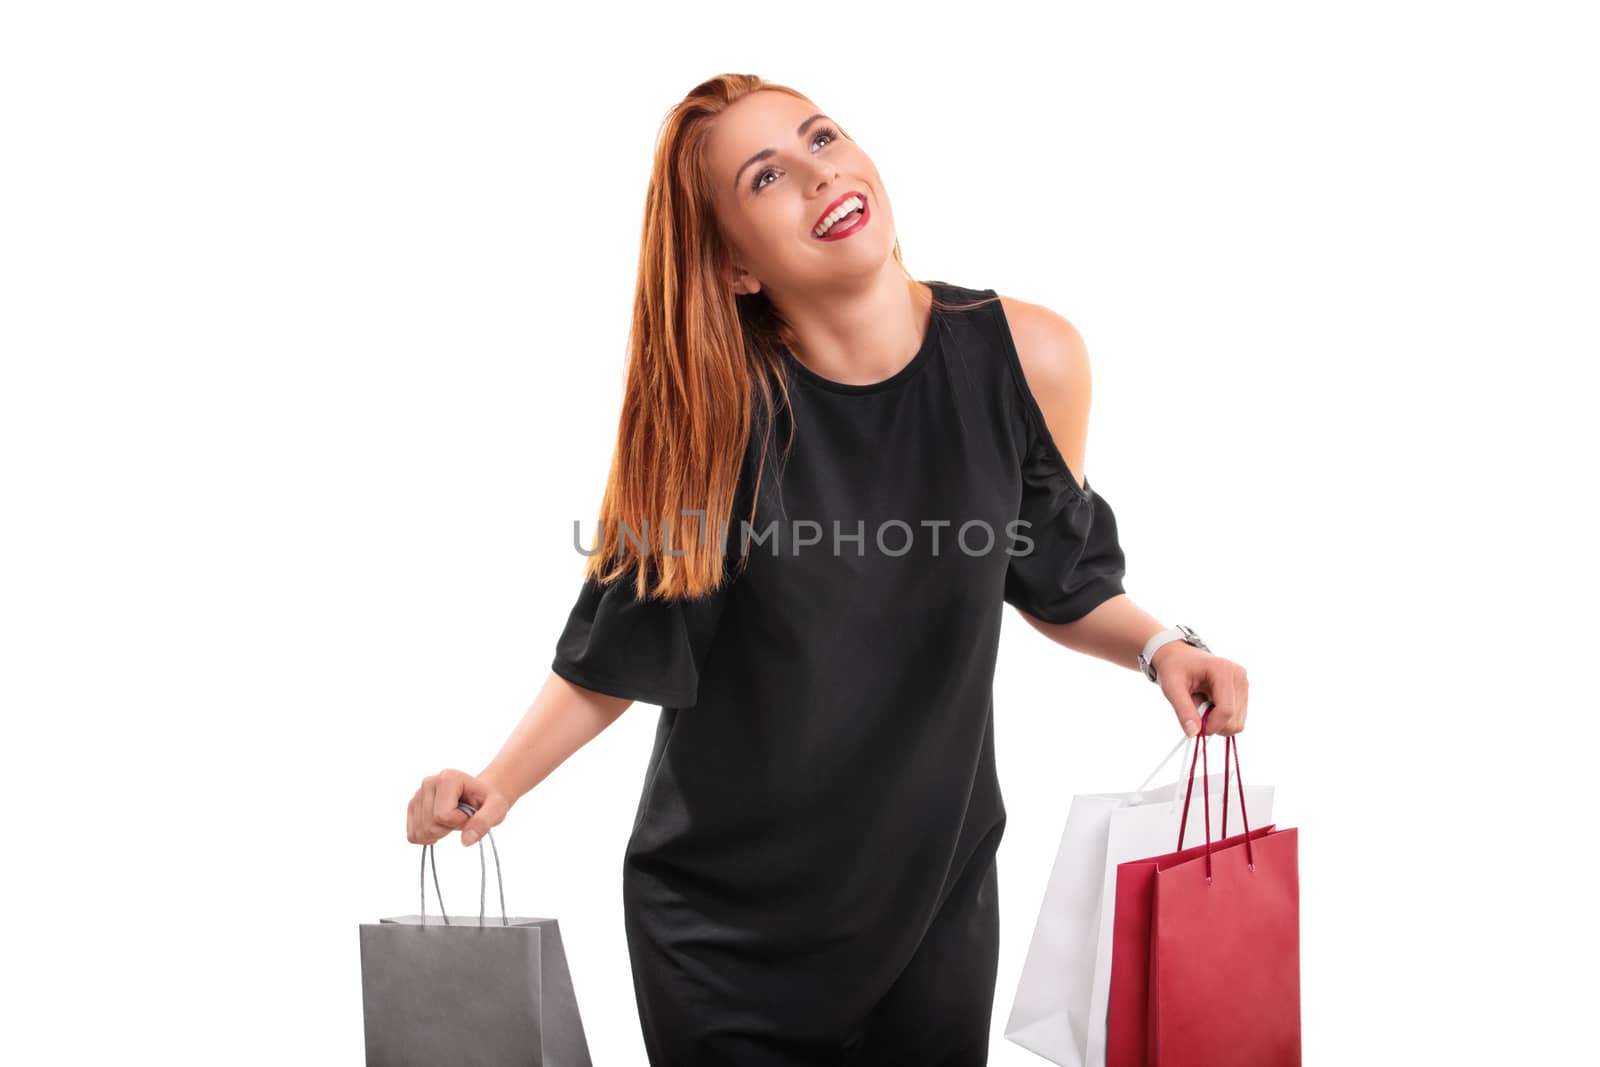 Sale, shopping concept. Excited beautiful young woman with shopping bags in both hands, isolated on white background.